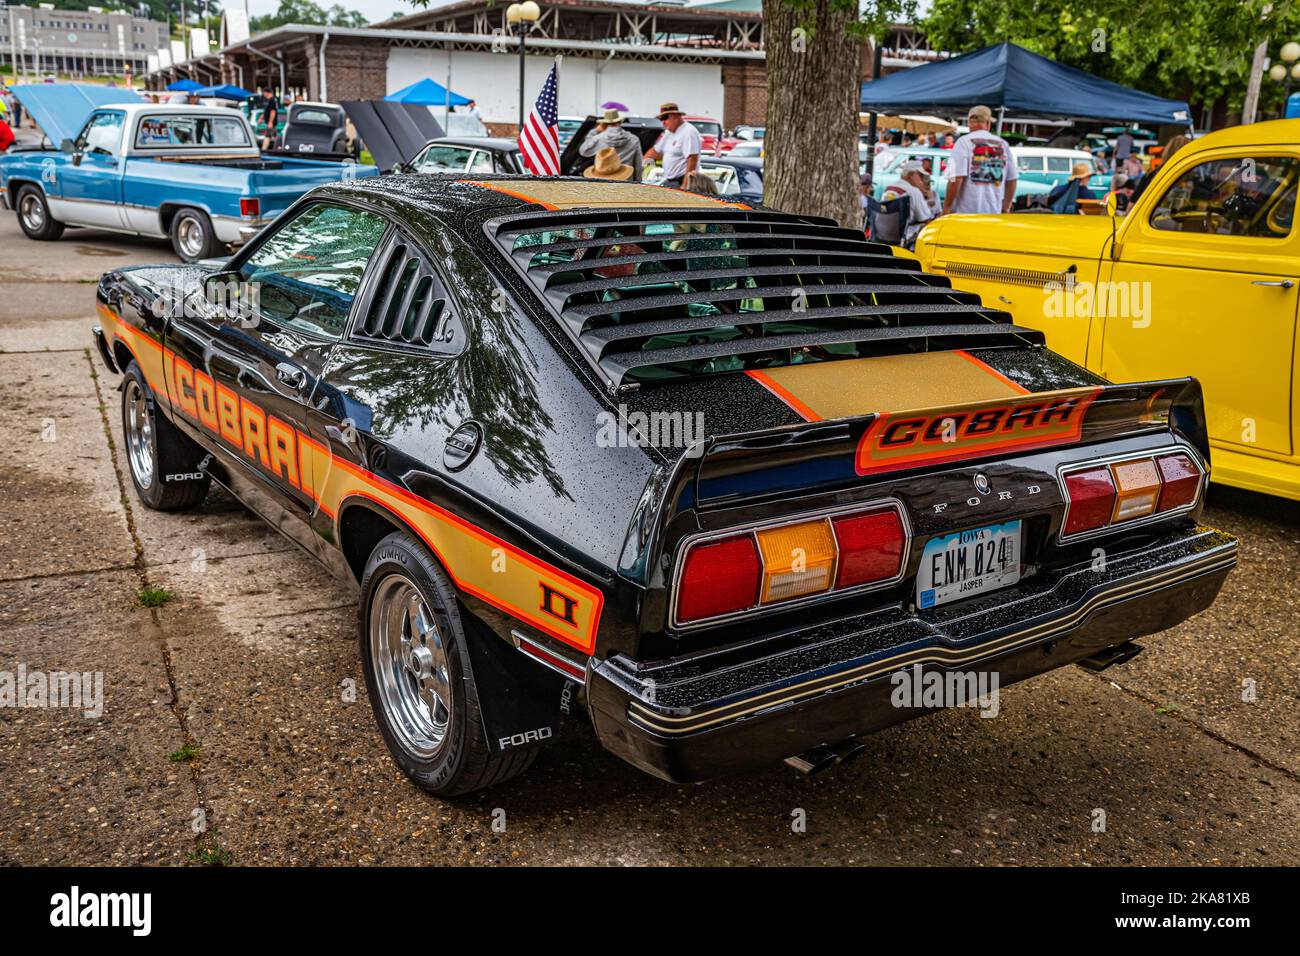 Des Moines, IA - July 01, 2022: High perspective rear corner view of a 1978 Ford Mustang Cobra II at a local car show. Stock Photo